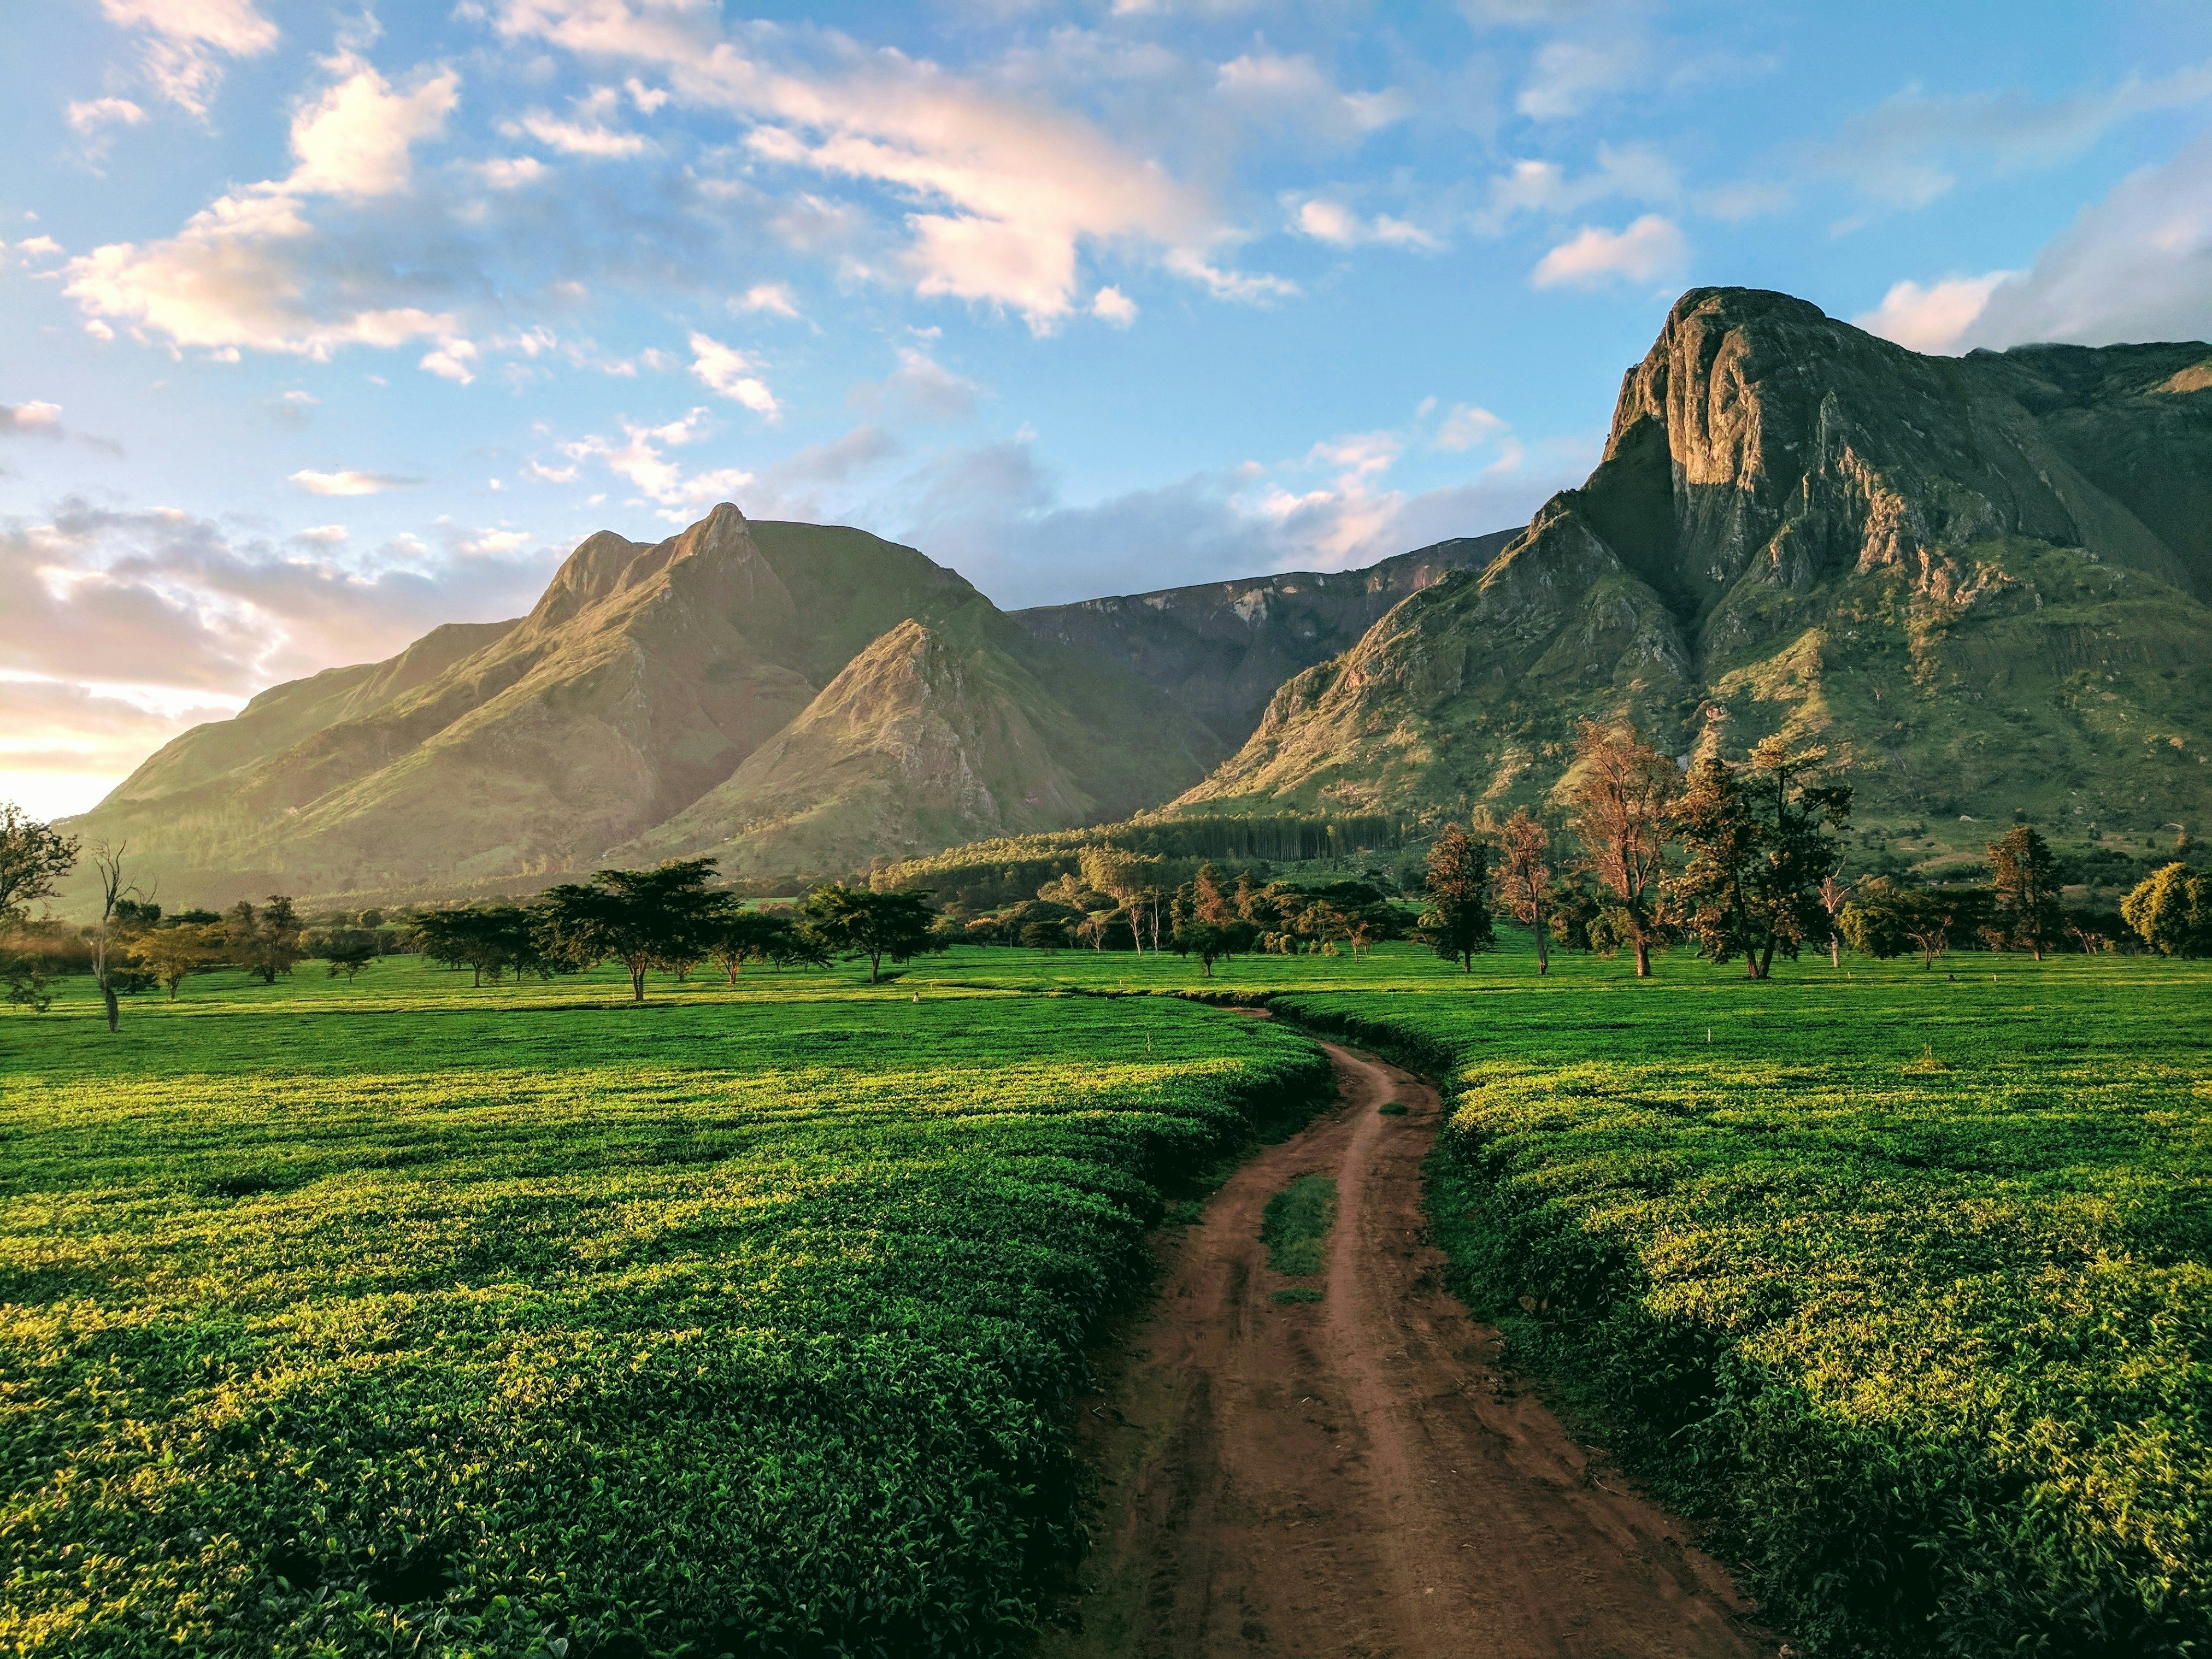 A scenic view of field and mountains against sky in Malawi